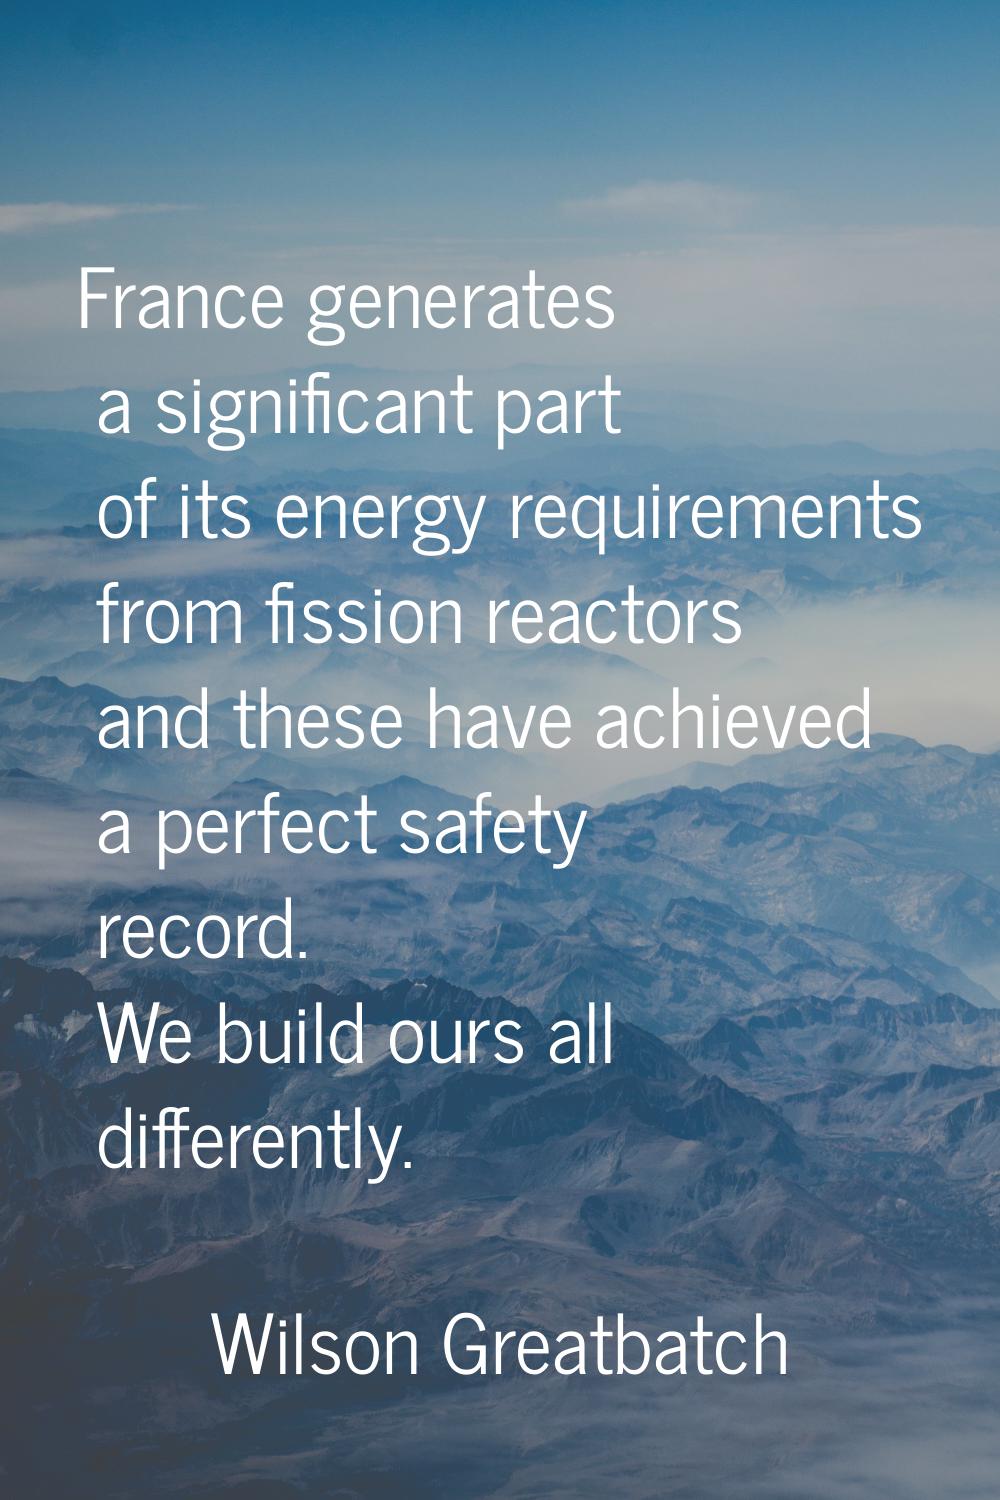 France generates a significant part of its energy requirements from fission reactors and these have